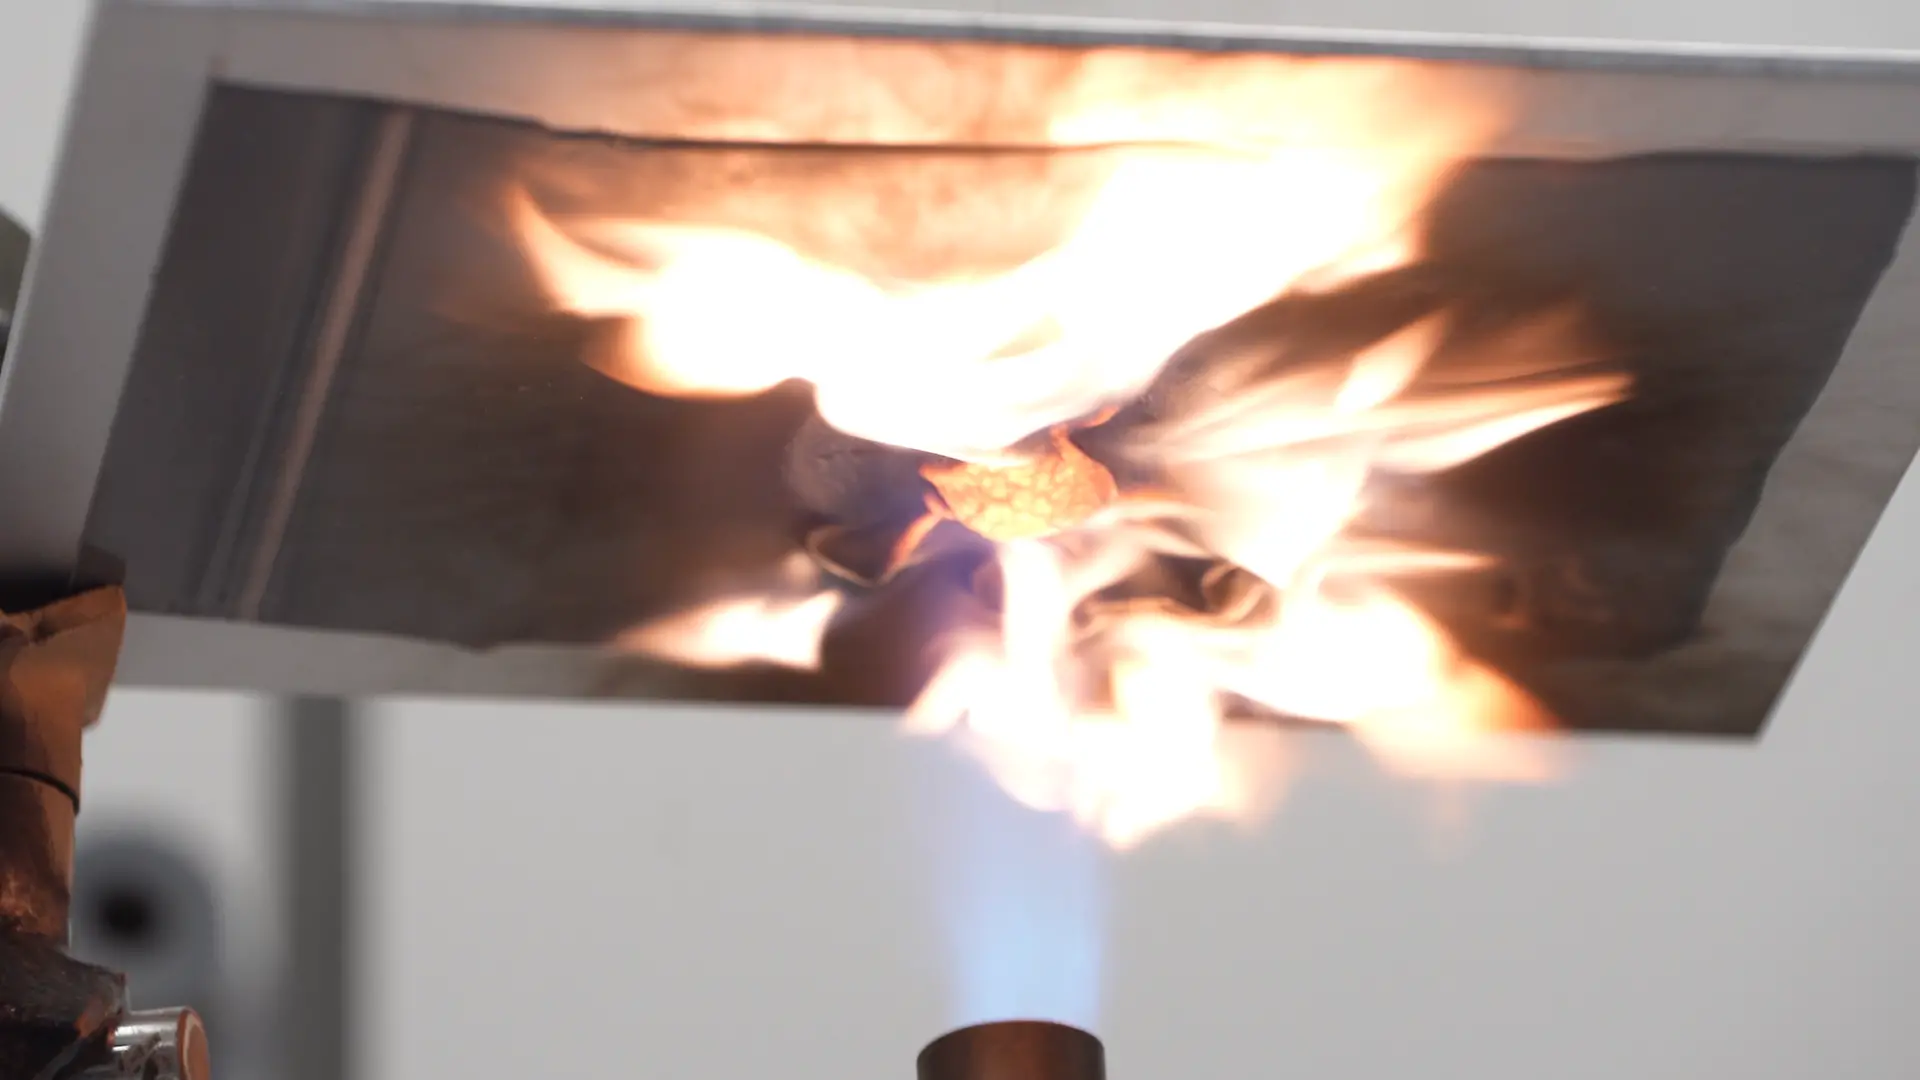 Image captured live during an open flame test; one of the testing methodologies that Henkel uses to test the performance of the fire protective coating products.